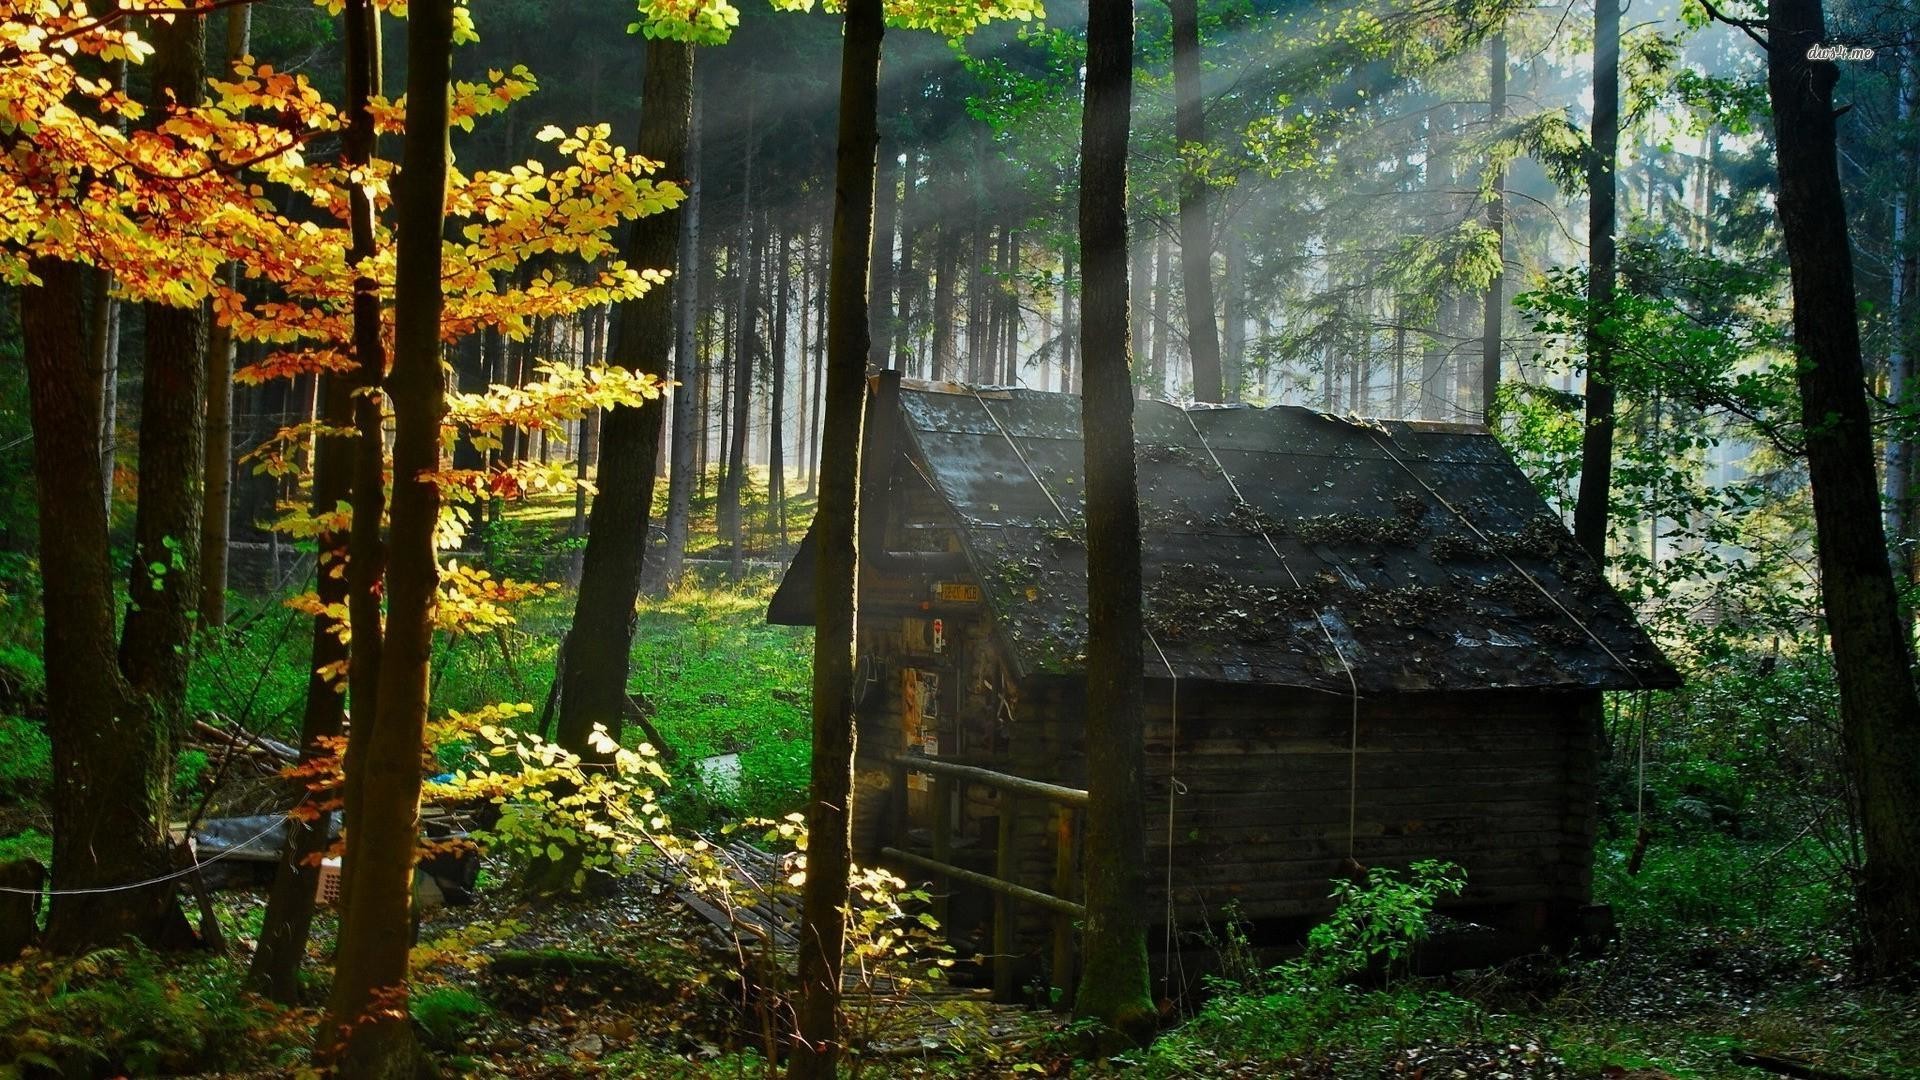 1920x1080 abandoned-house-wood-Google-Search-wallpaper-wp6802181